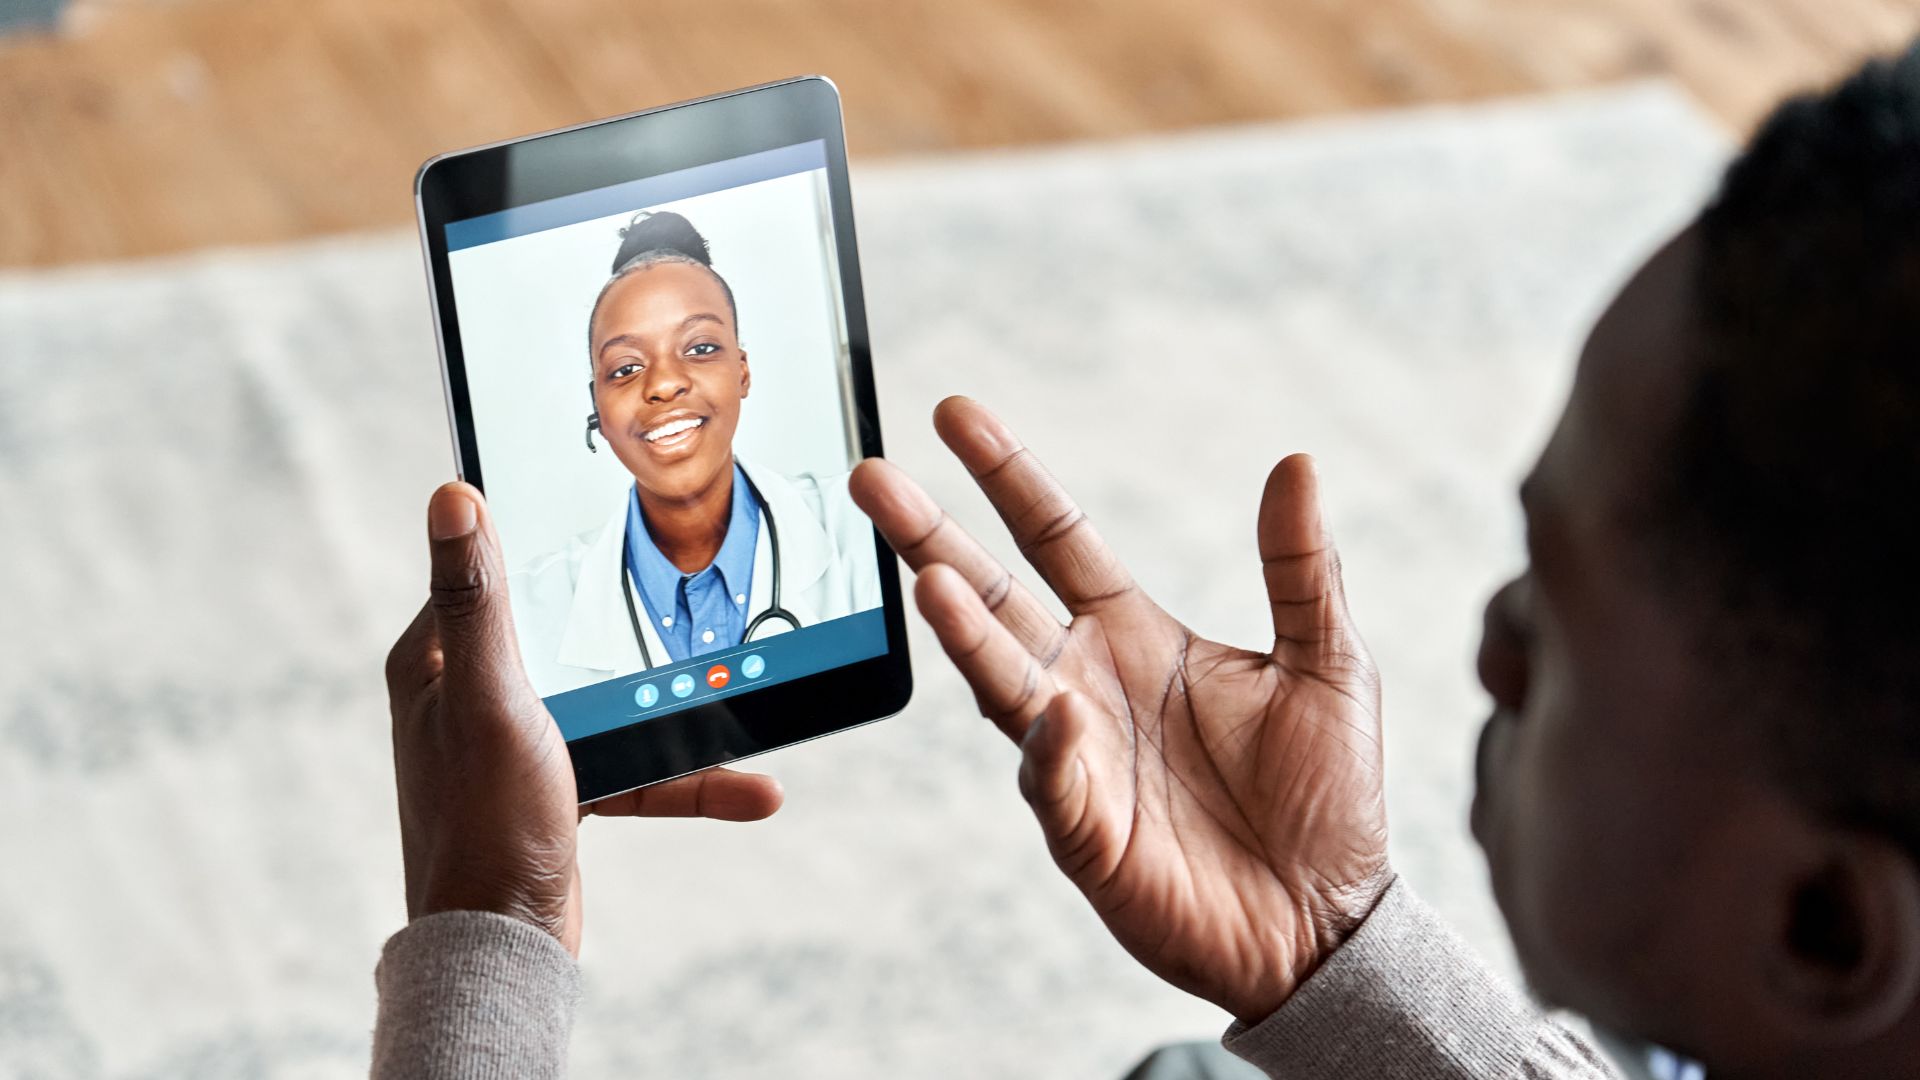 virtual Health Consultations Are Reshaping Patient Care